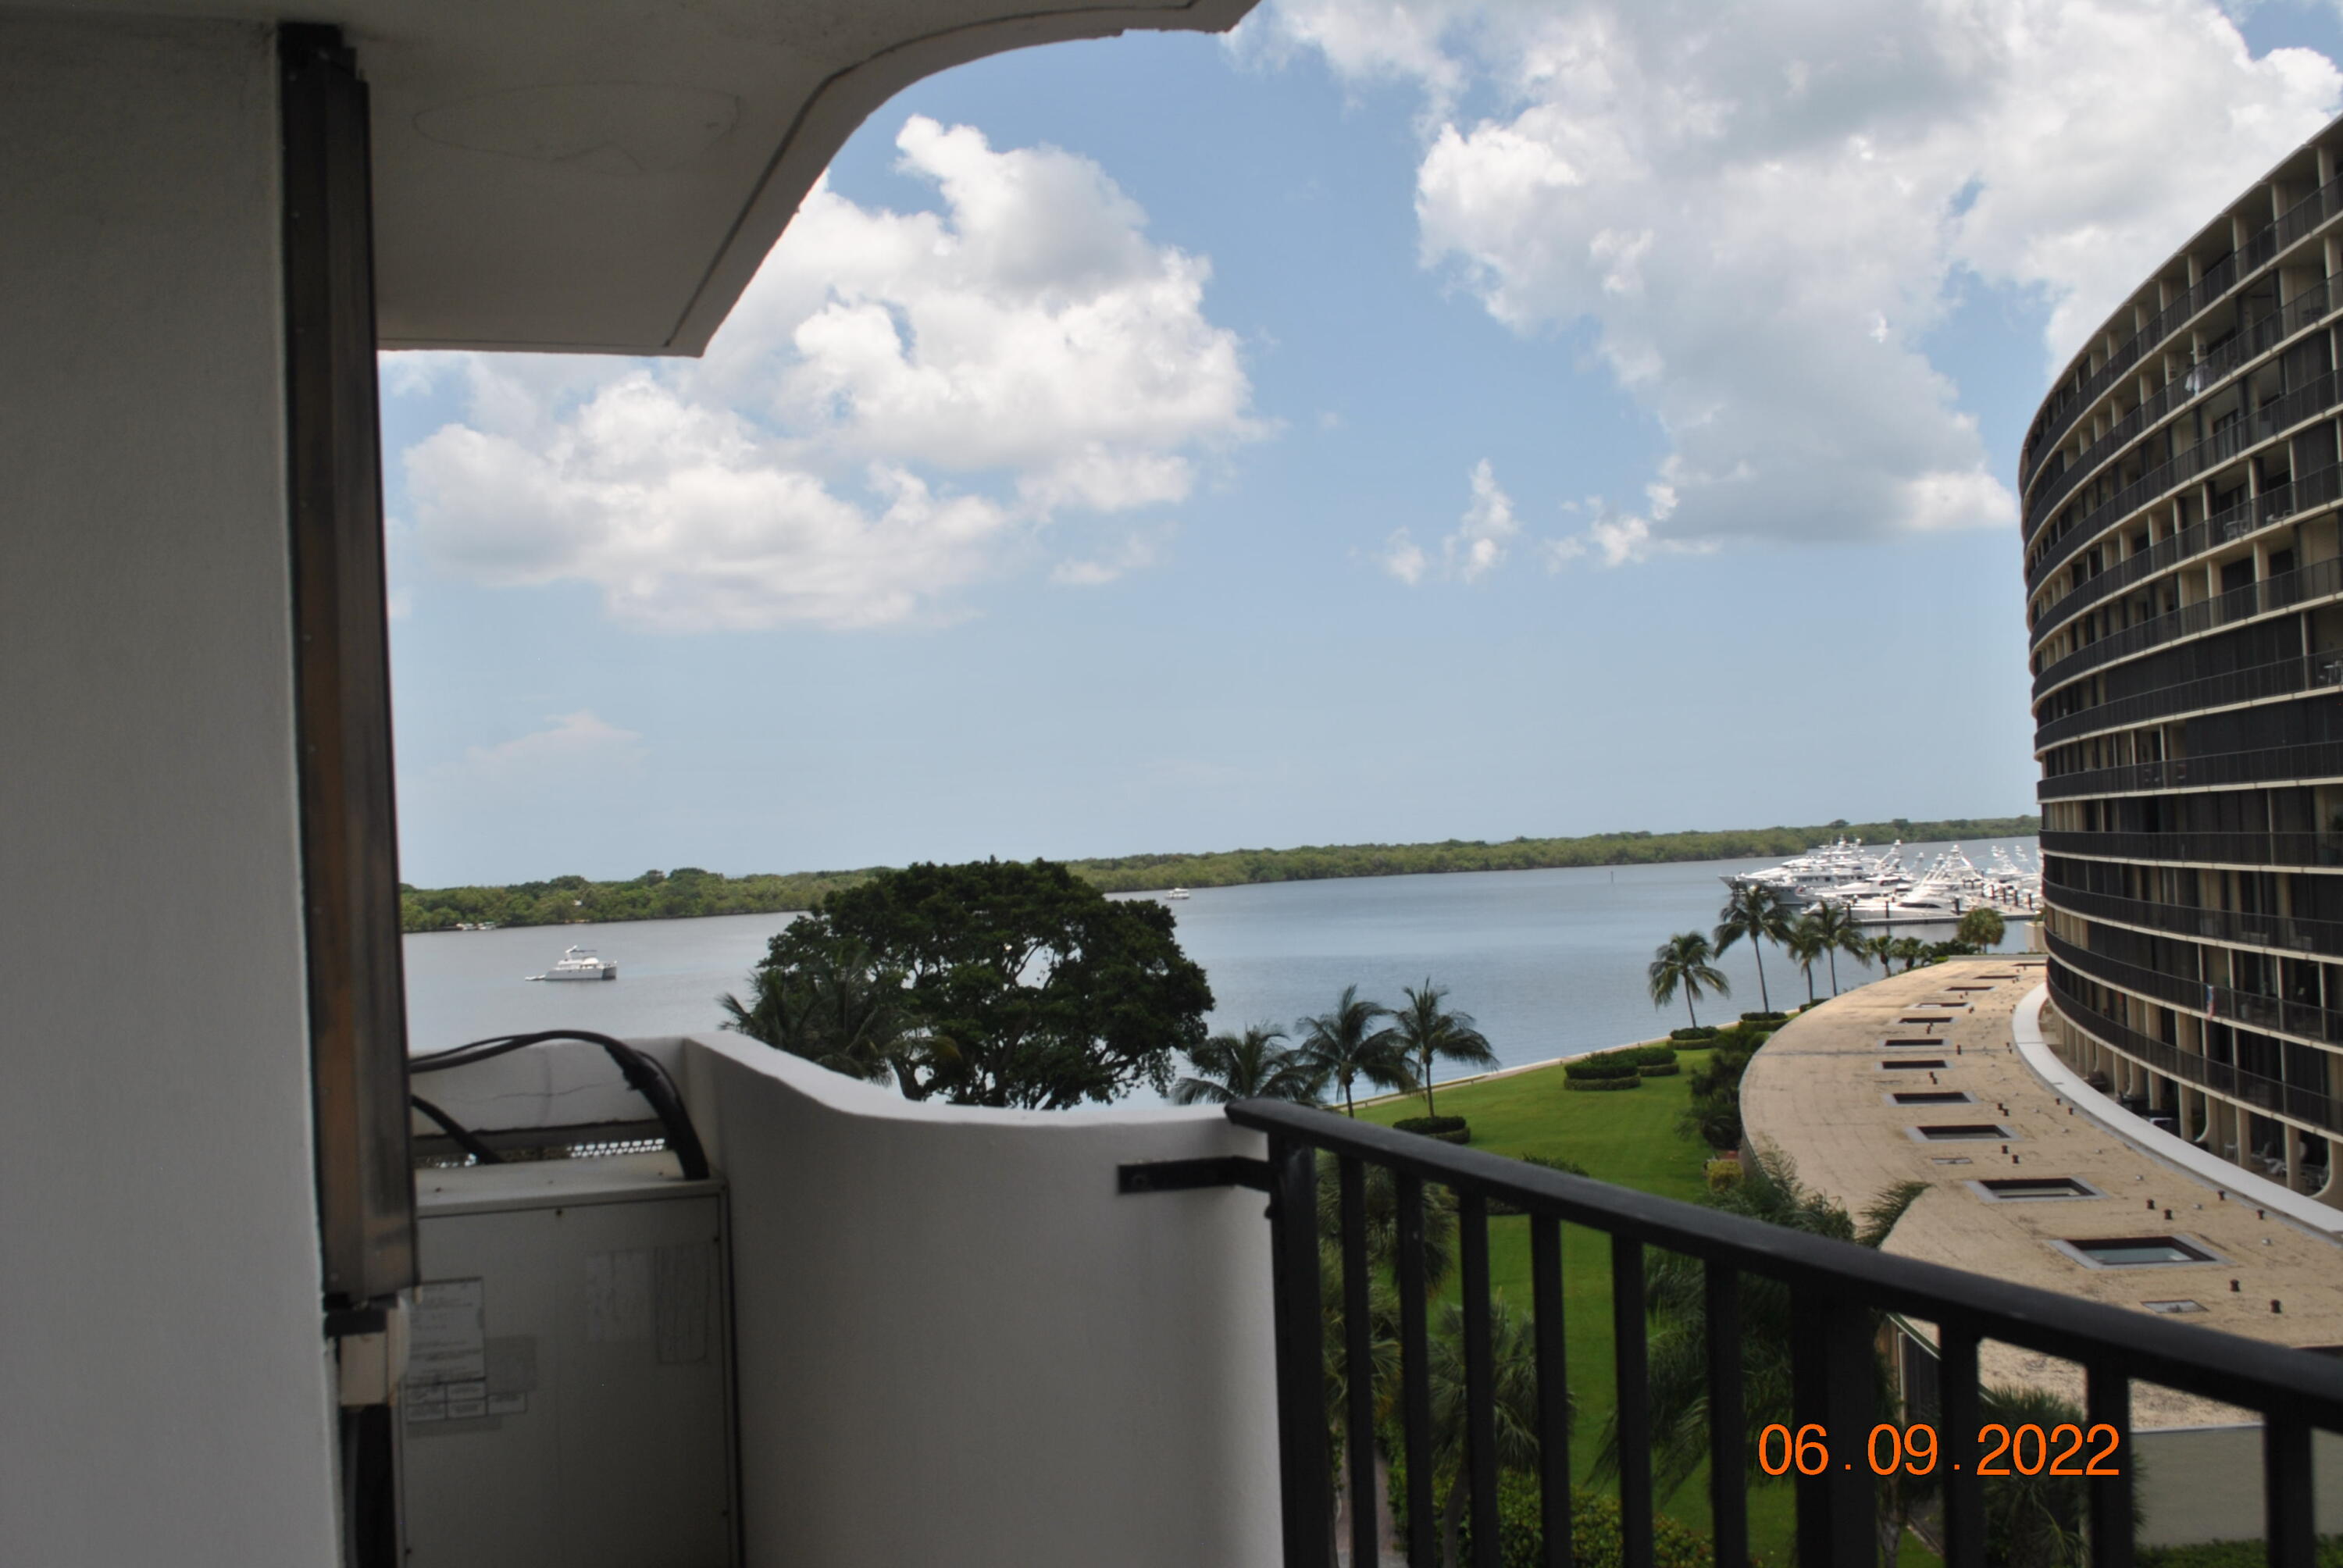 Opportunity to own your piece of paradise in Old Port Cove. Make this 1 bedroom, 1 bath plus a den your own private get away. This little gem is looking for a new owner to bring it to life with new touches. Sit on your balcony and enjoy the views of the Intracoastal Waterway.